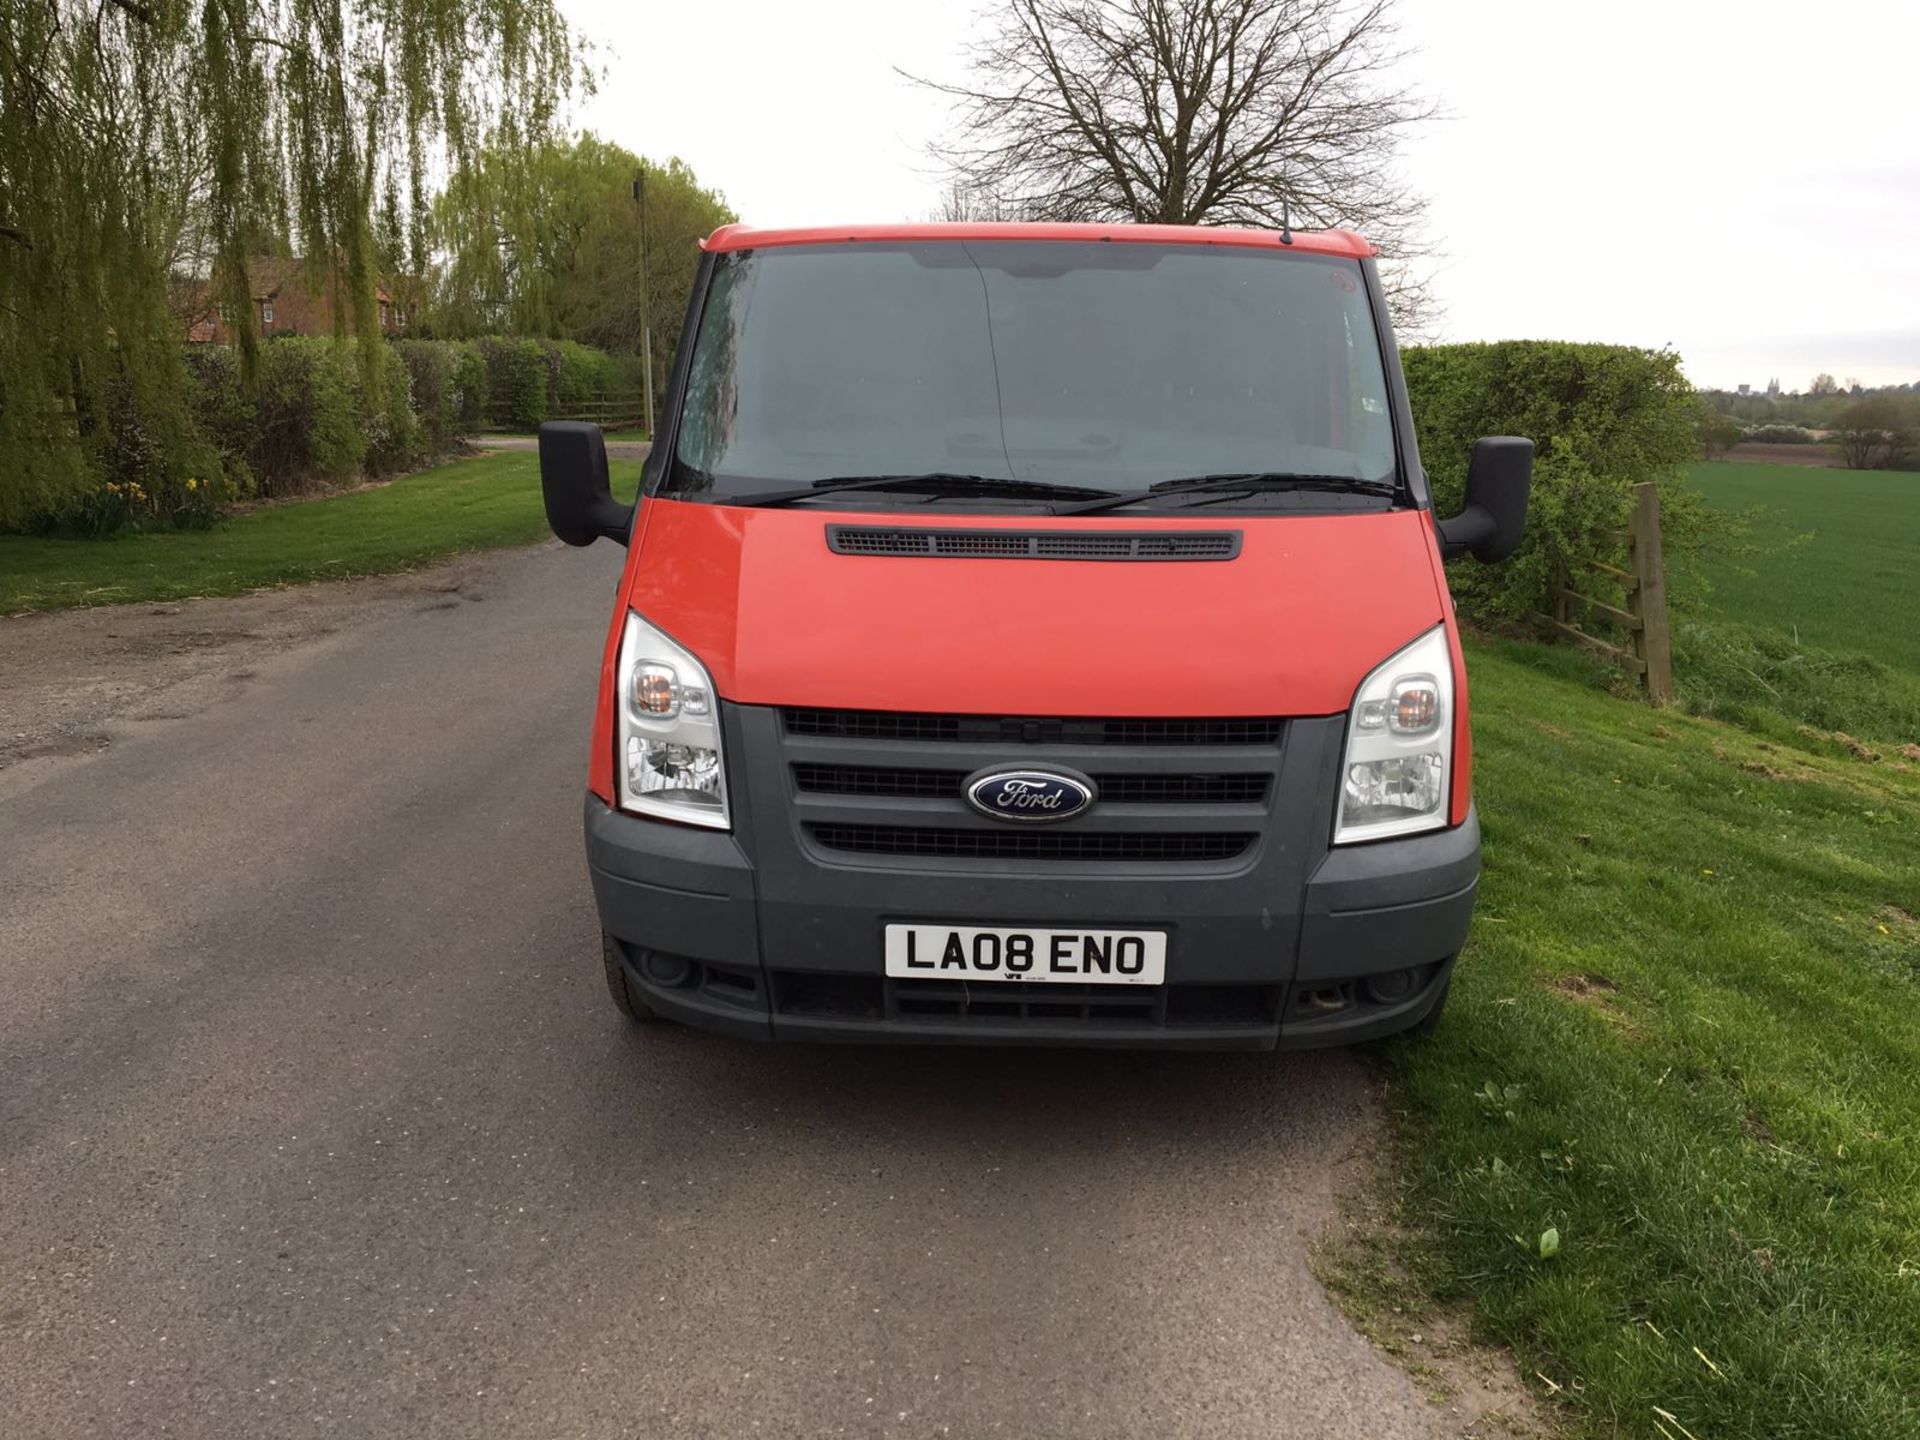 2008/08 REG FORD TRANSIT 85 T260S FWD, SHOWING 1 OWNER - ROYAL MAIL! - Image 2 of 10